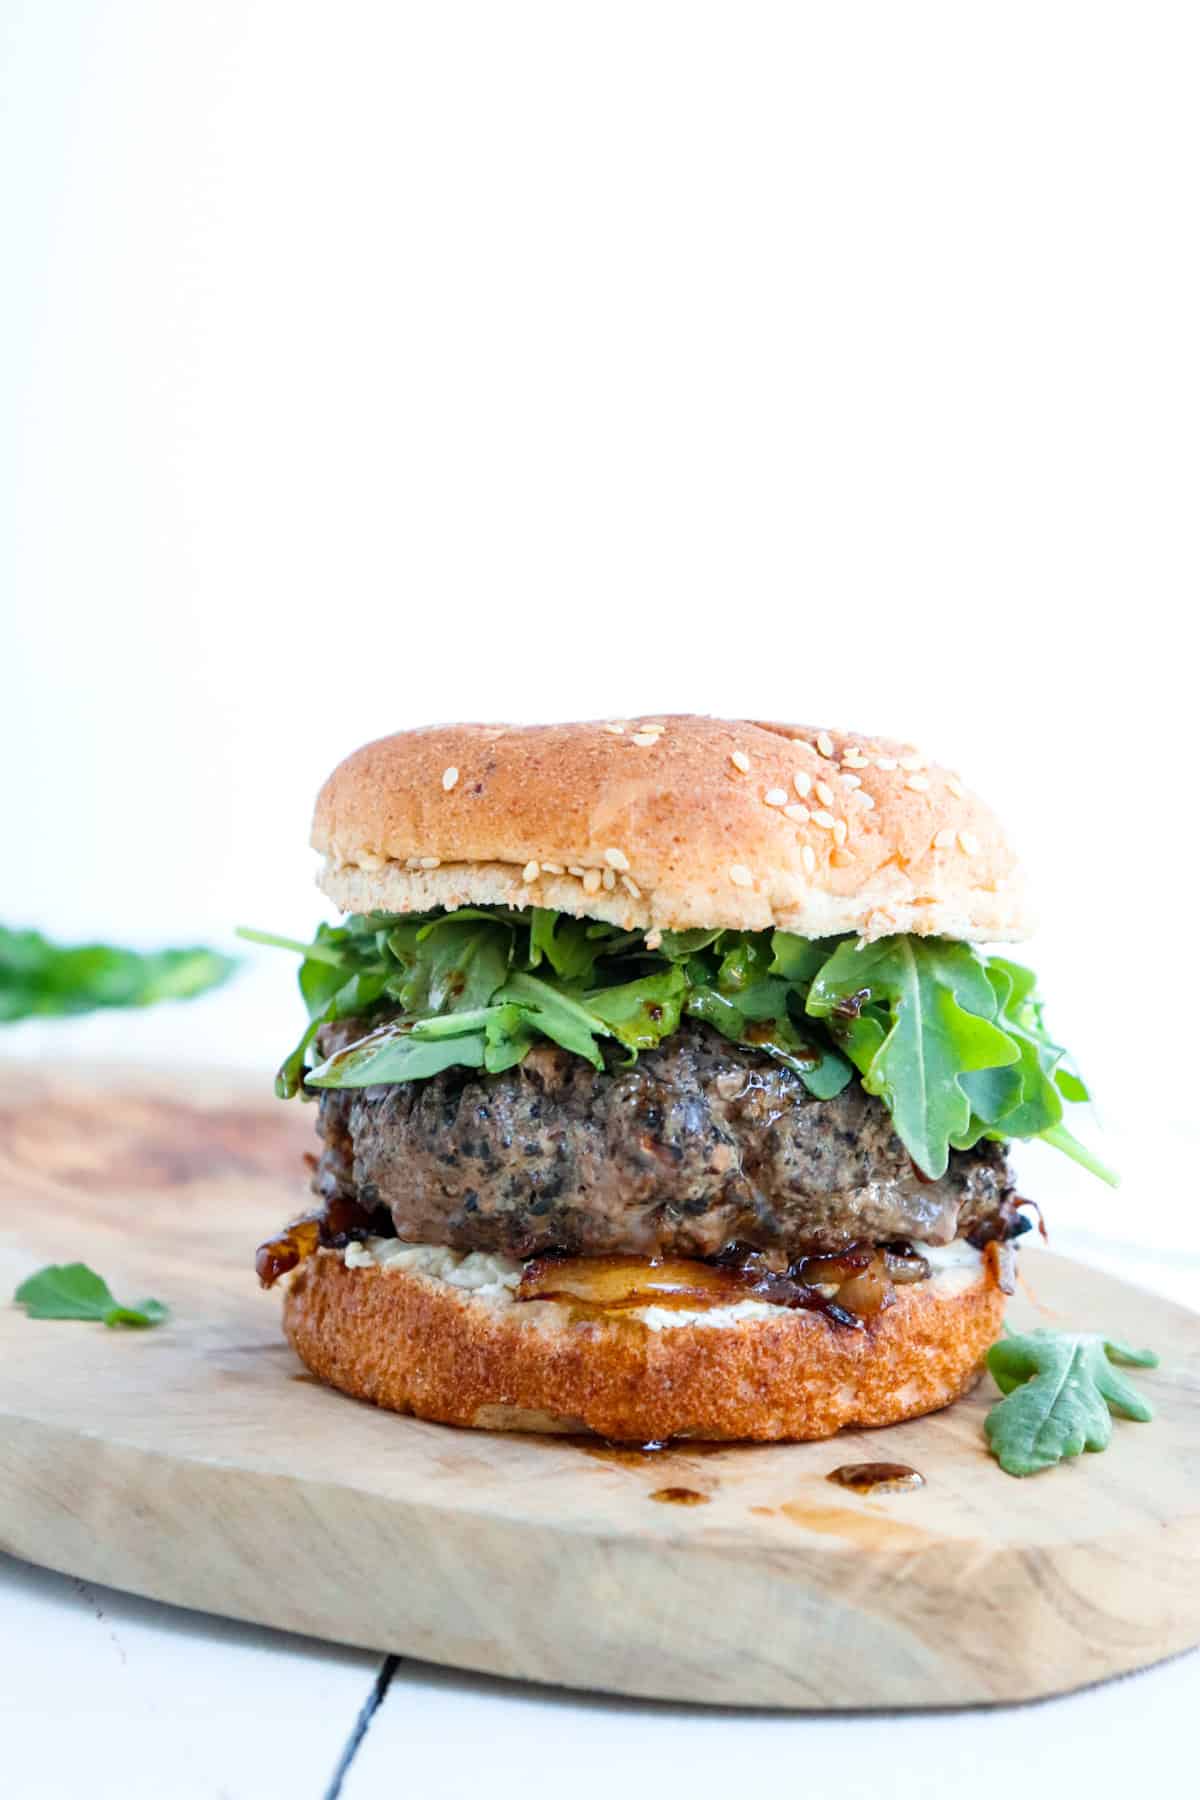 plated burger with arugula scattered around.